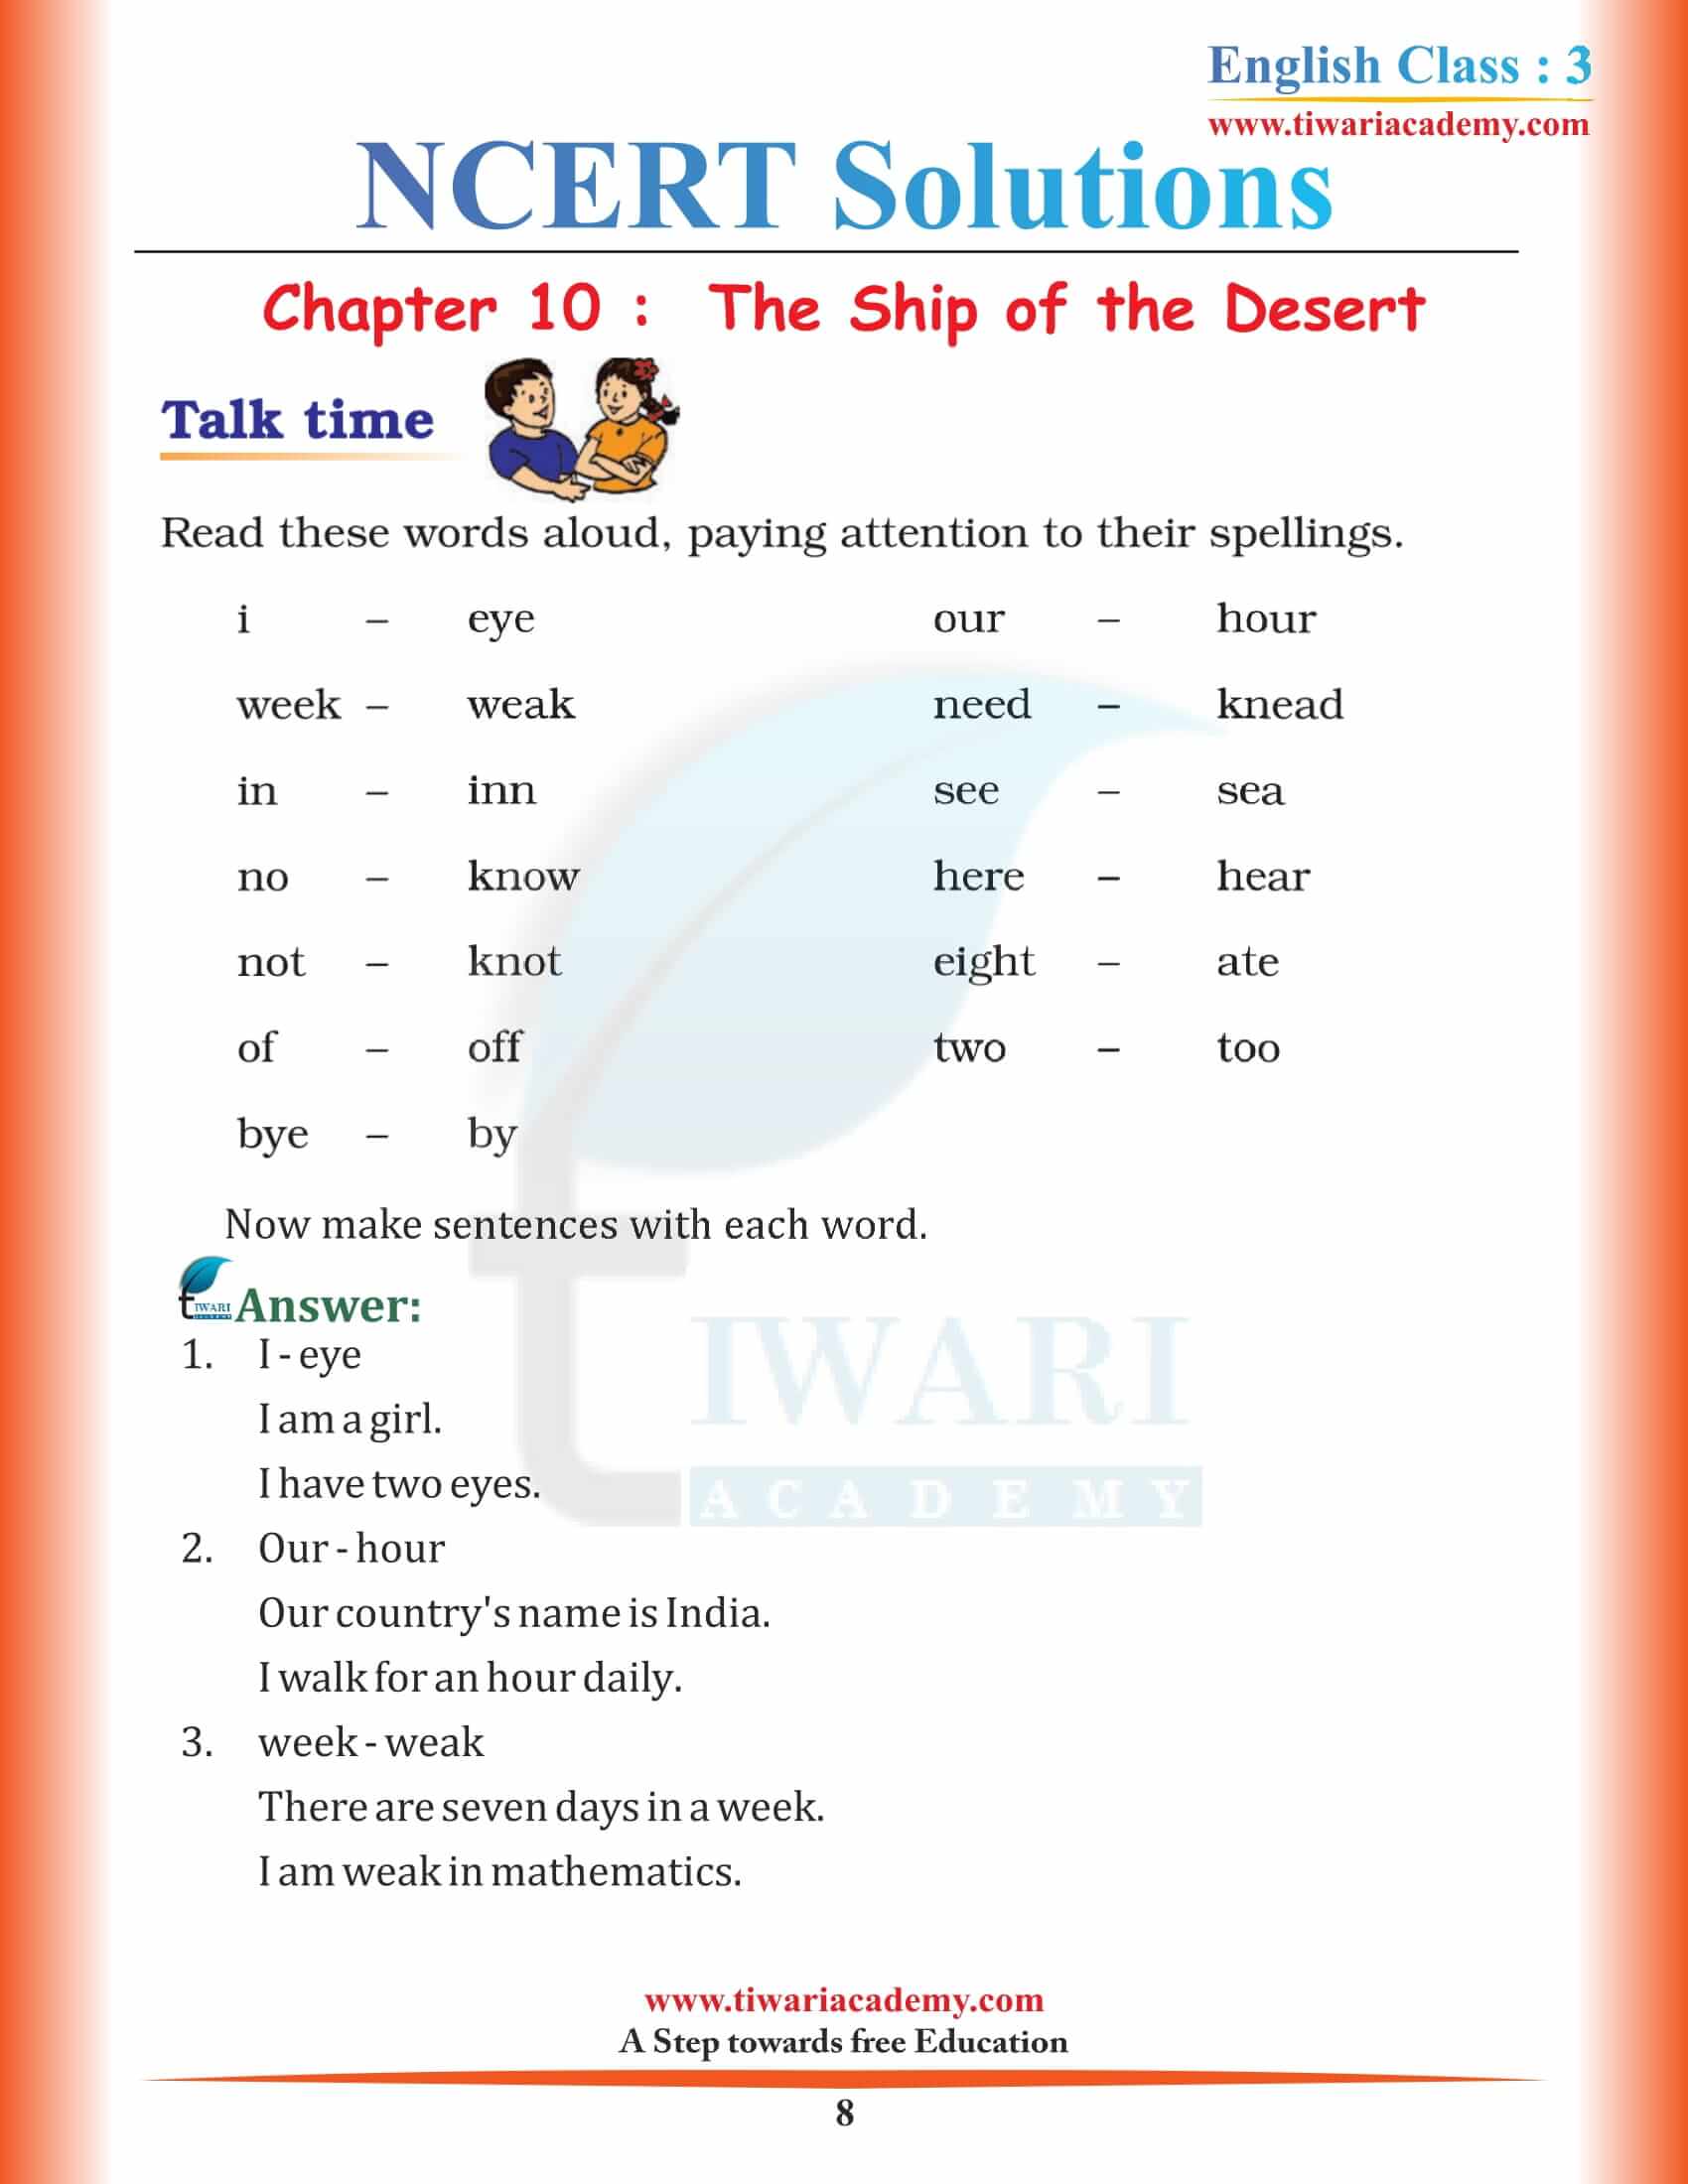 Class 3 English Unit 10 solutions free